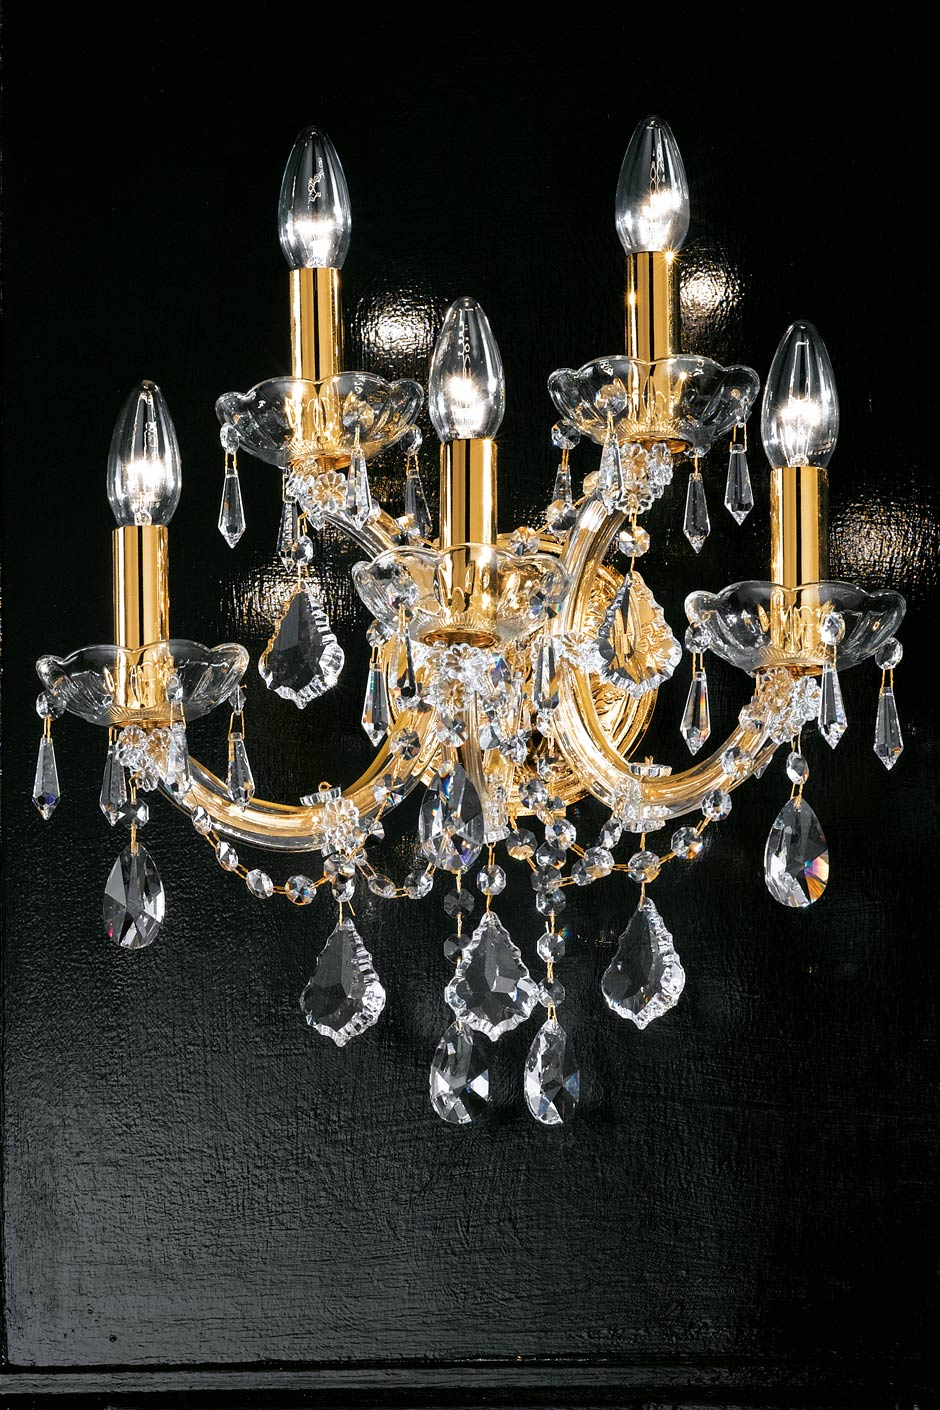 Single-scrolled 5-light crystal and gold-plated-metal wall light . Masiero. 